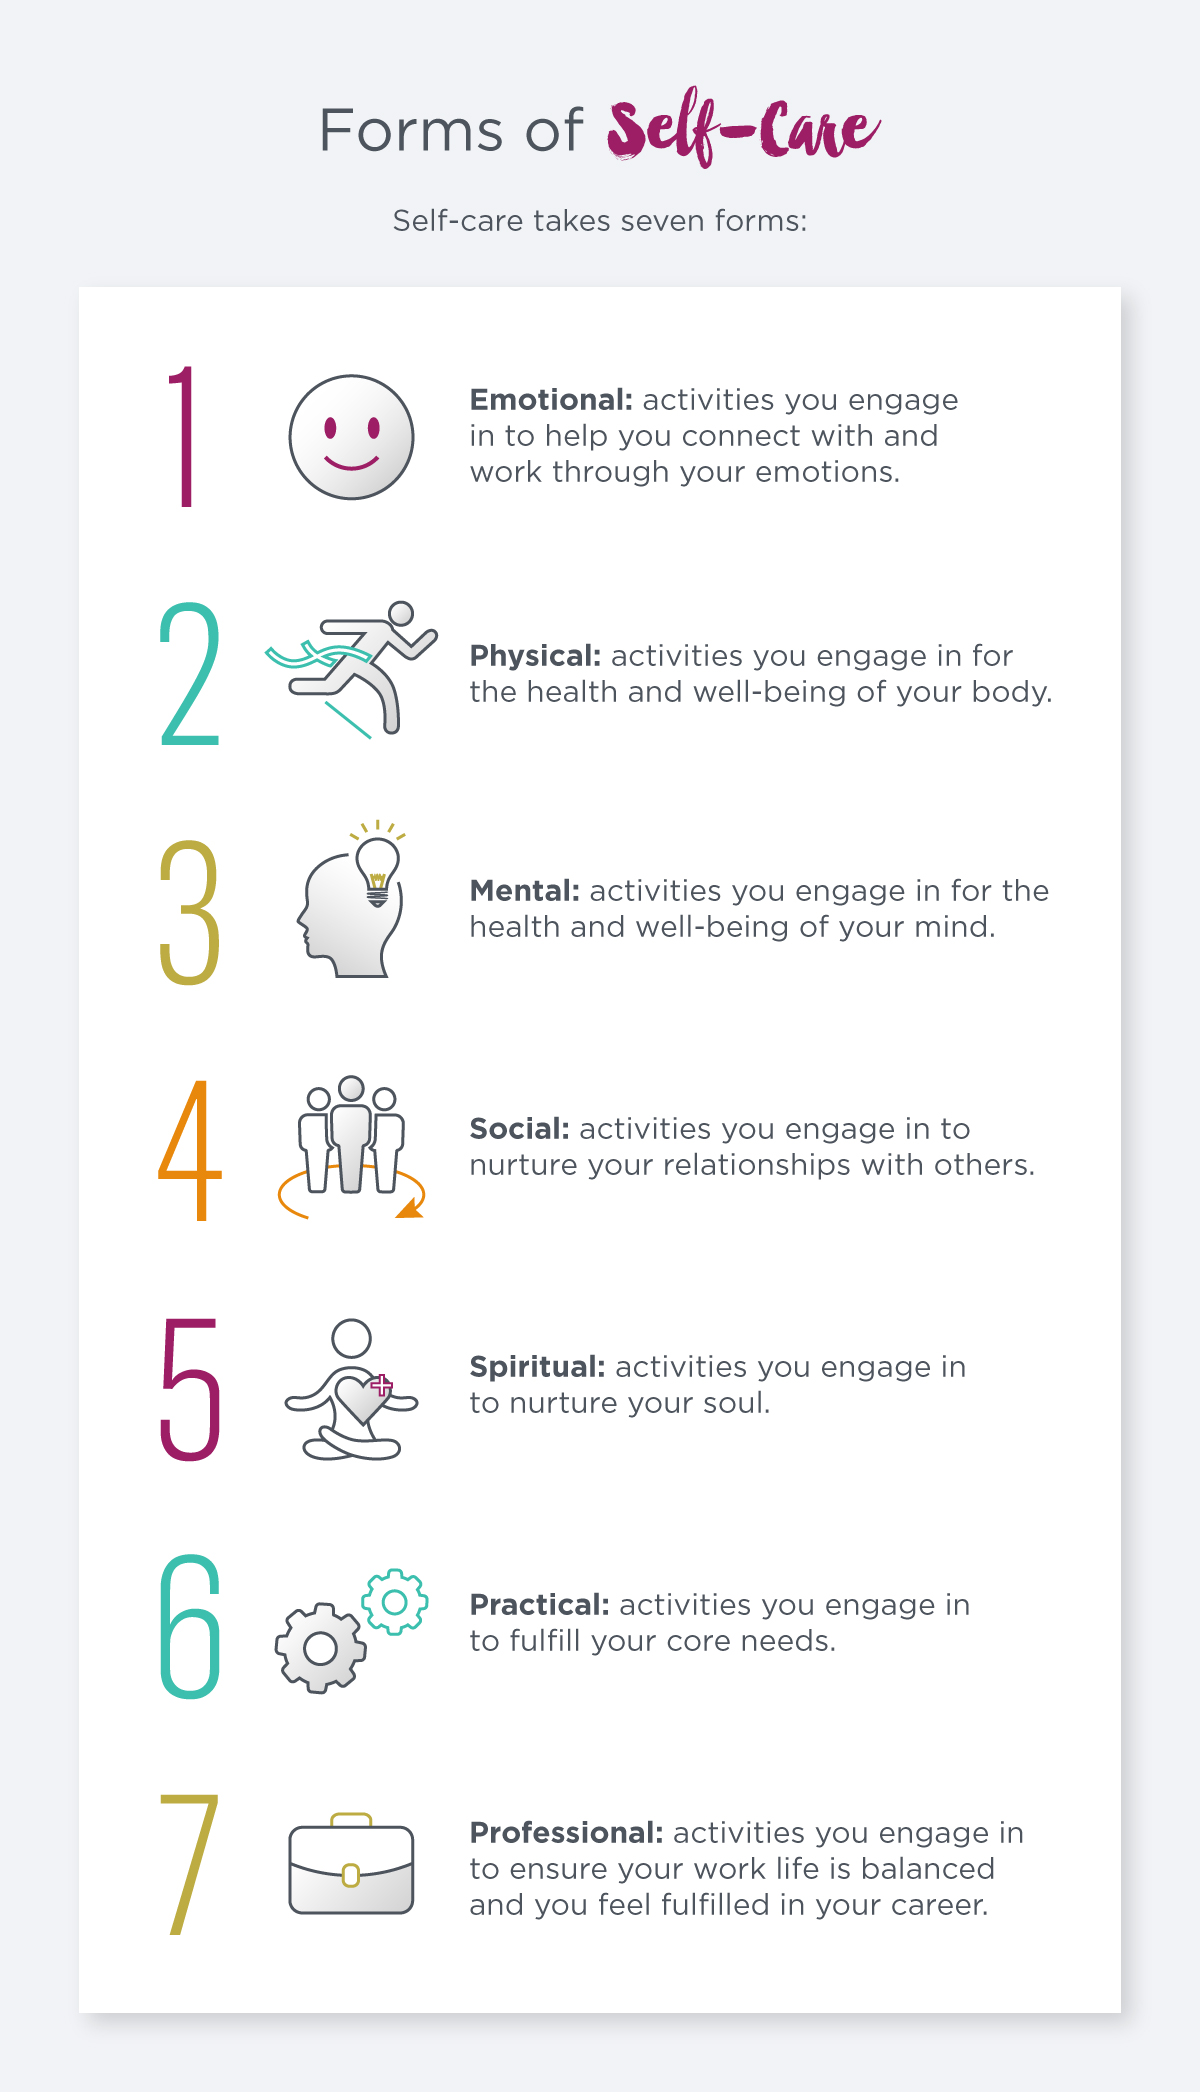 7 Forms of Self-Care